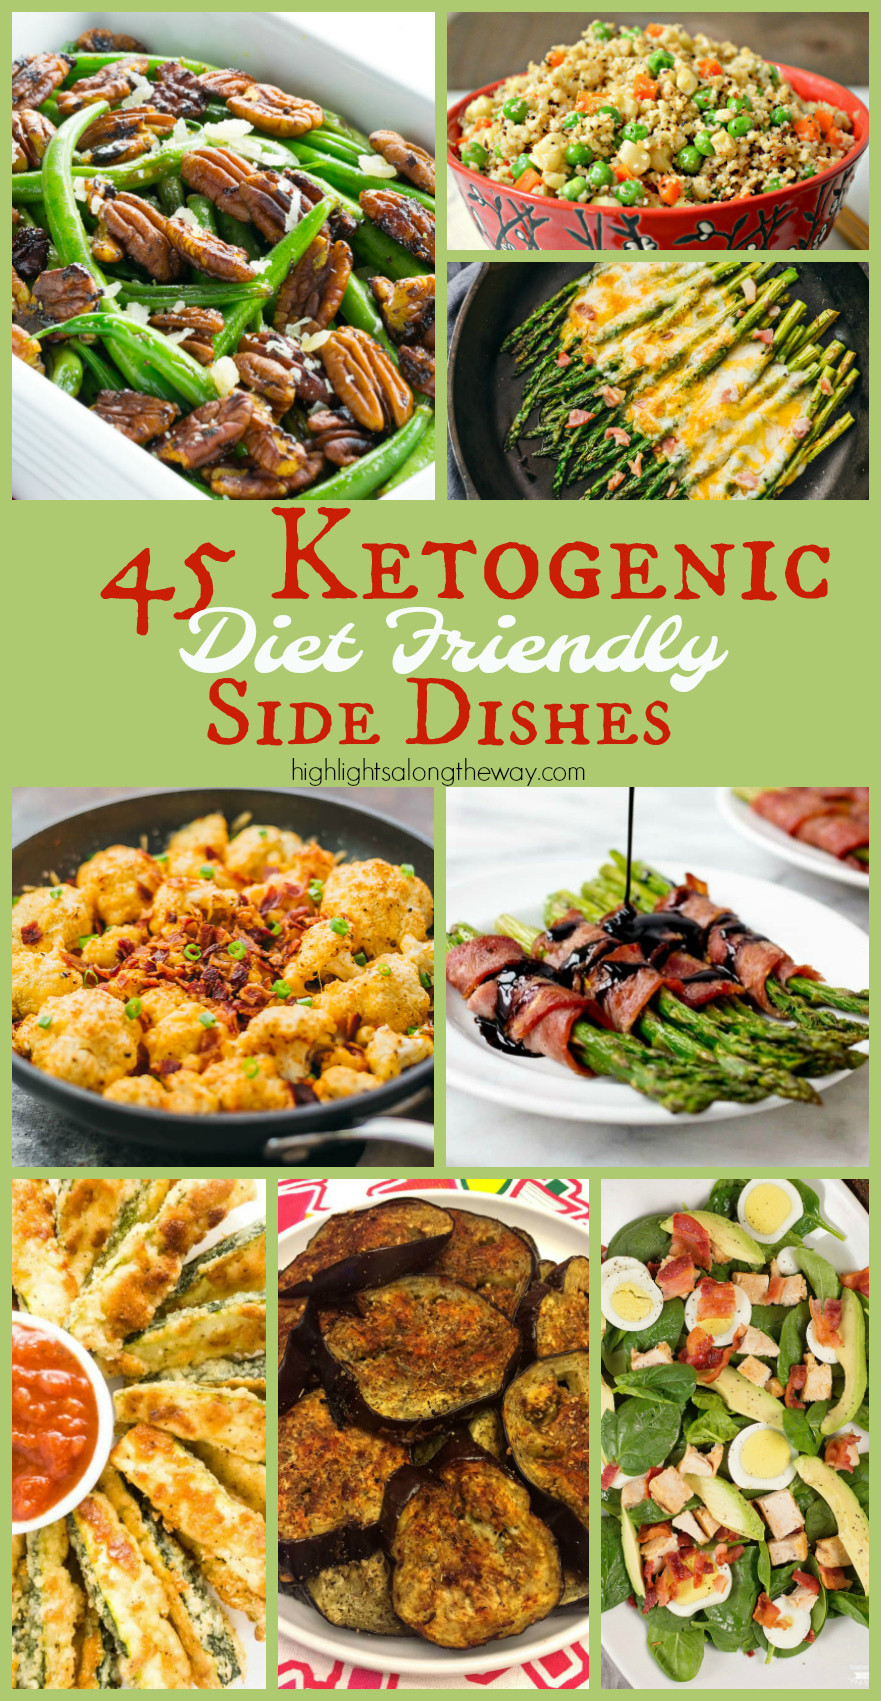 Keto Diet Dinner Recipes
 Keto Diet Side Dishes for the Holidays Ketogenic recipe